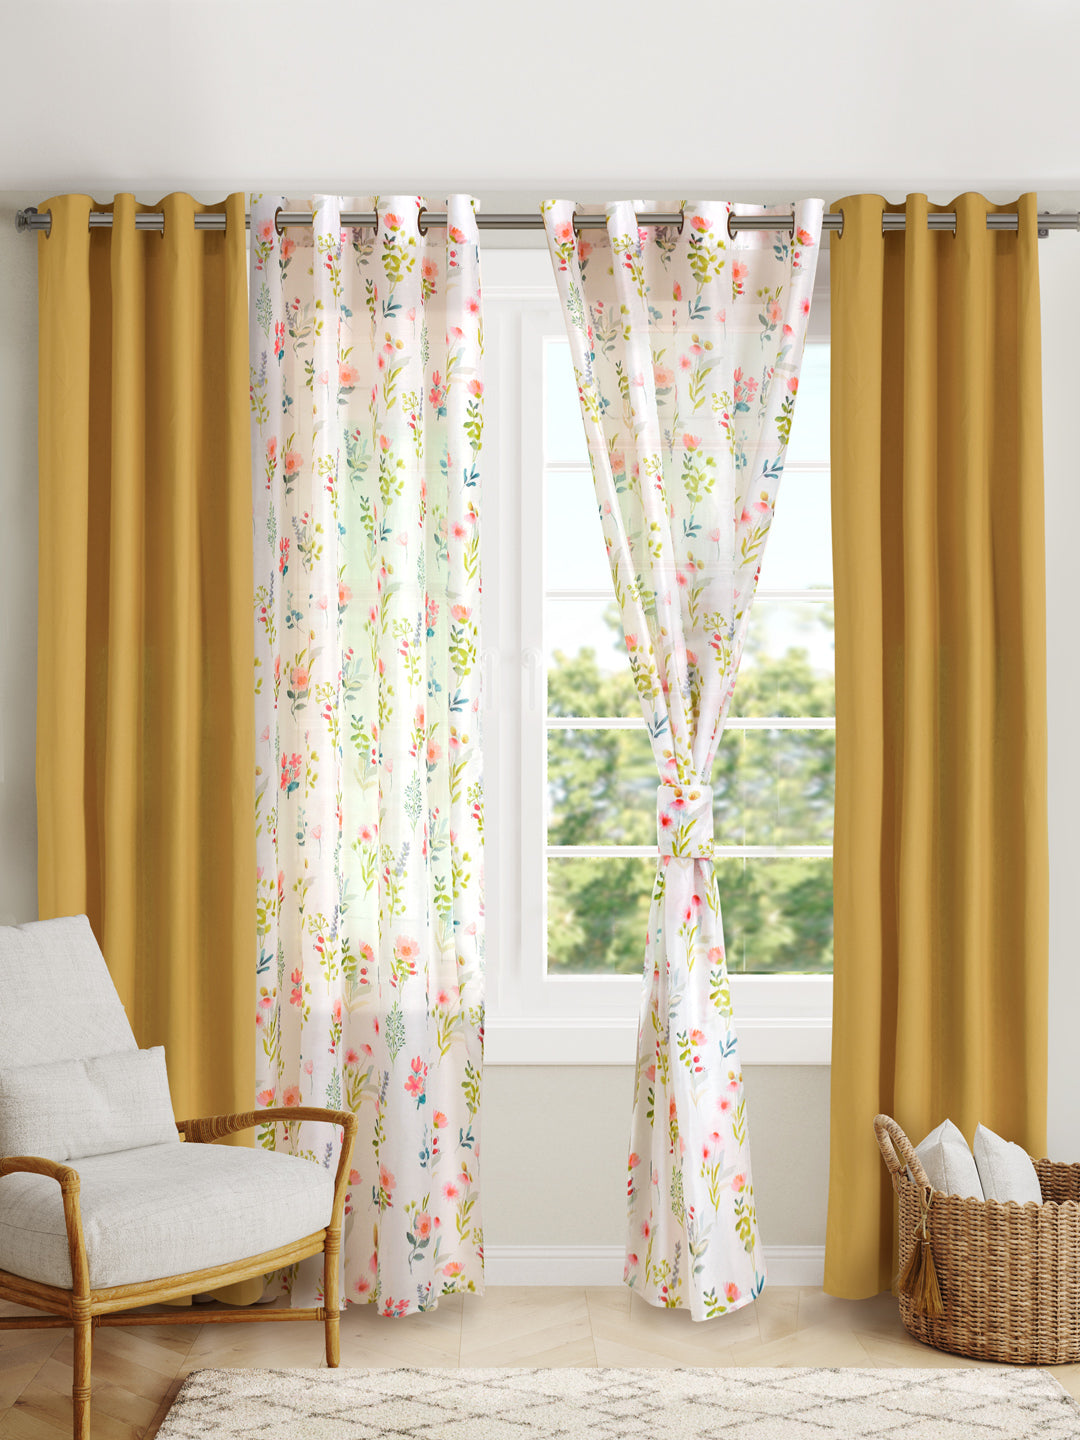 Blanc9 Set Of 4 Flora Printed With Mustard Plain 7Ft. Curtains